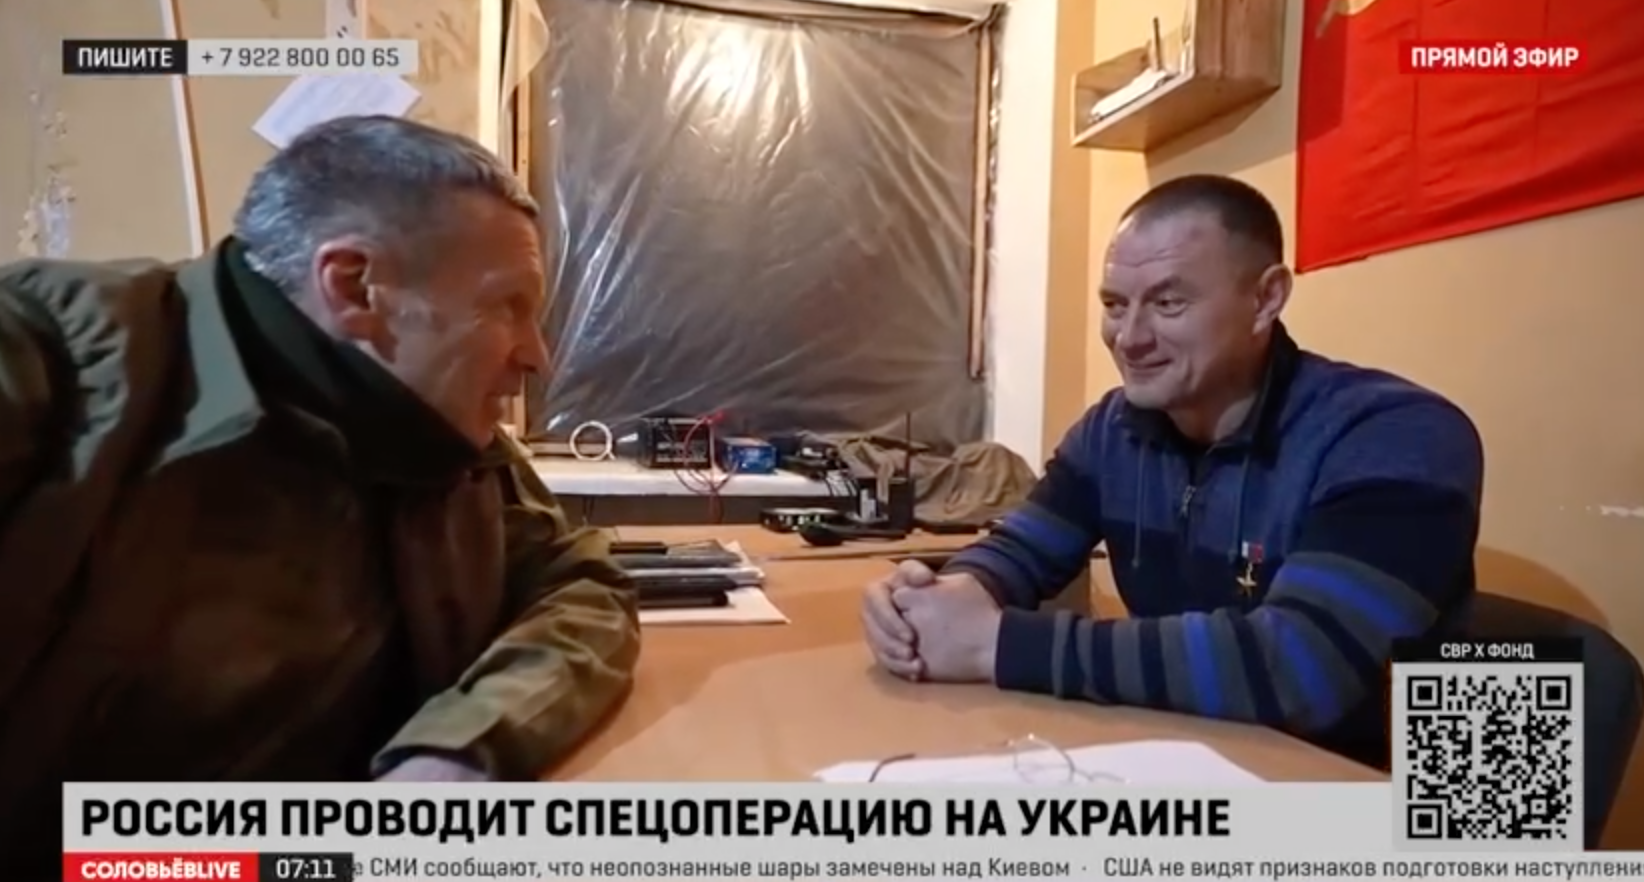 Wagner commander known by the call sign 'Zombie' (right) gives a rare interview to Russian TV host and propagandist Vladimir Solovyev on 15 February, 2023